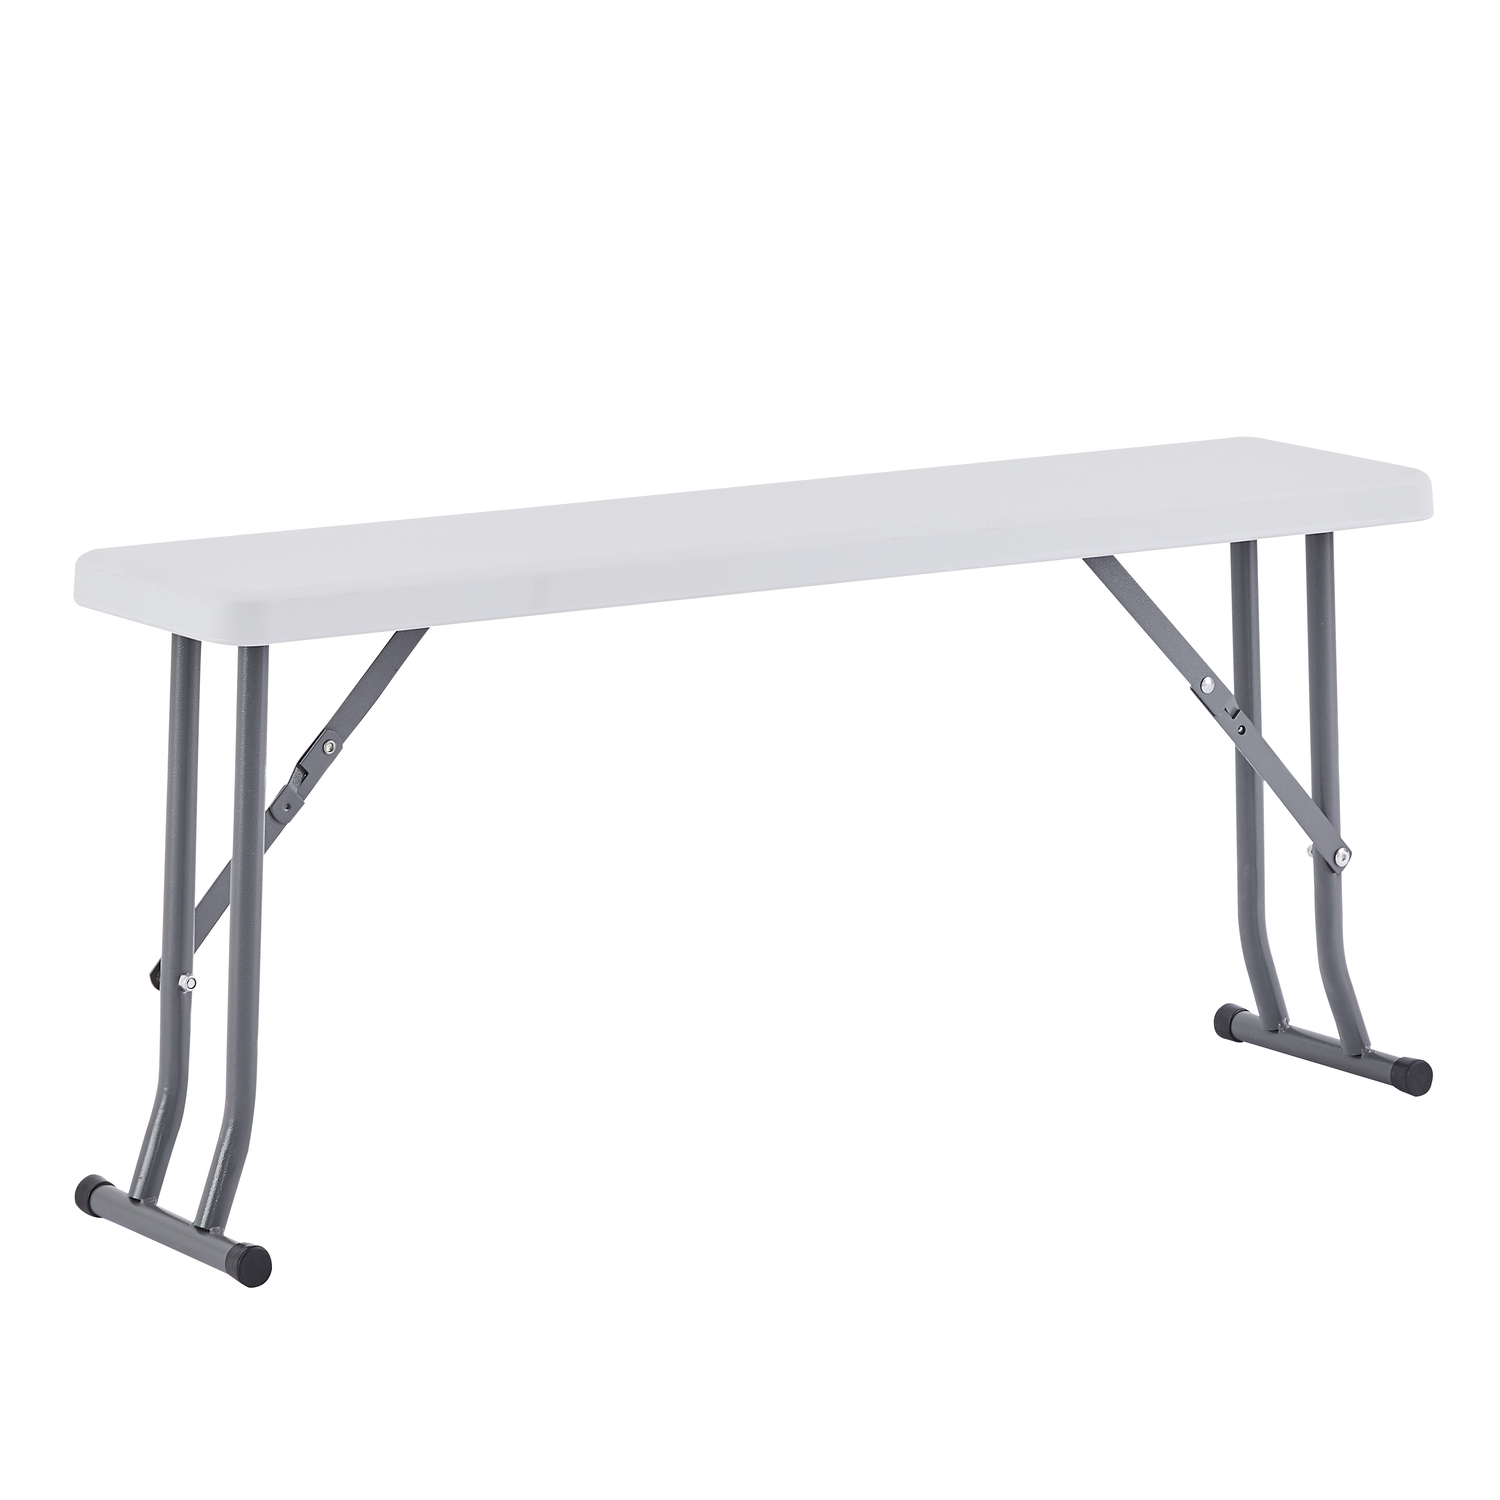 3 Piece Folding Table with Benches, 3.7 Feet Portable Picnic Table Set, Heat Resistant Waterproof Outdoor Dining Table Set, Folding Side Table Set, Table and Bench Set for Party White - image 5 of 7